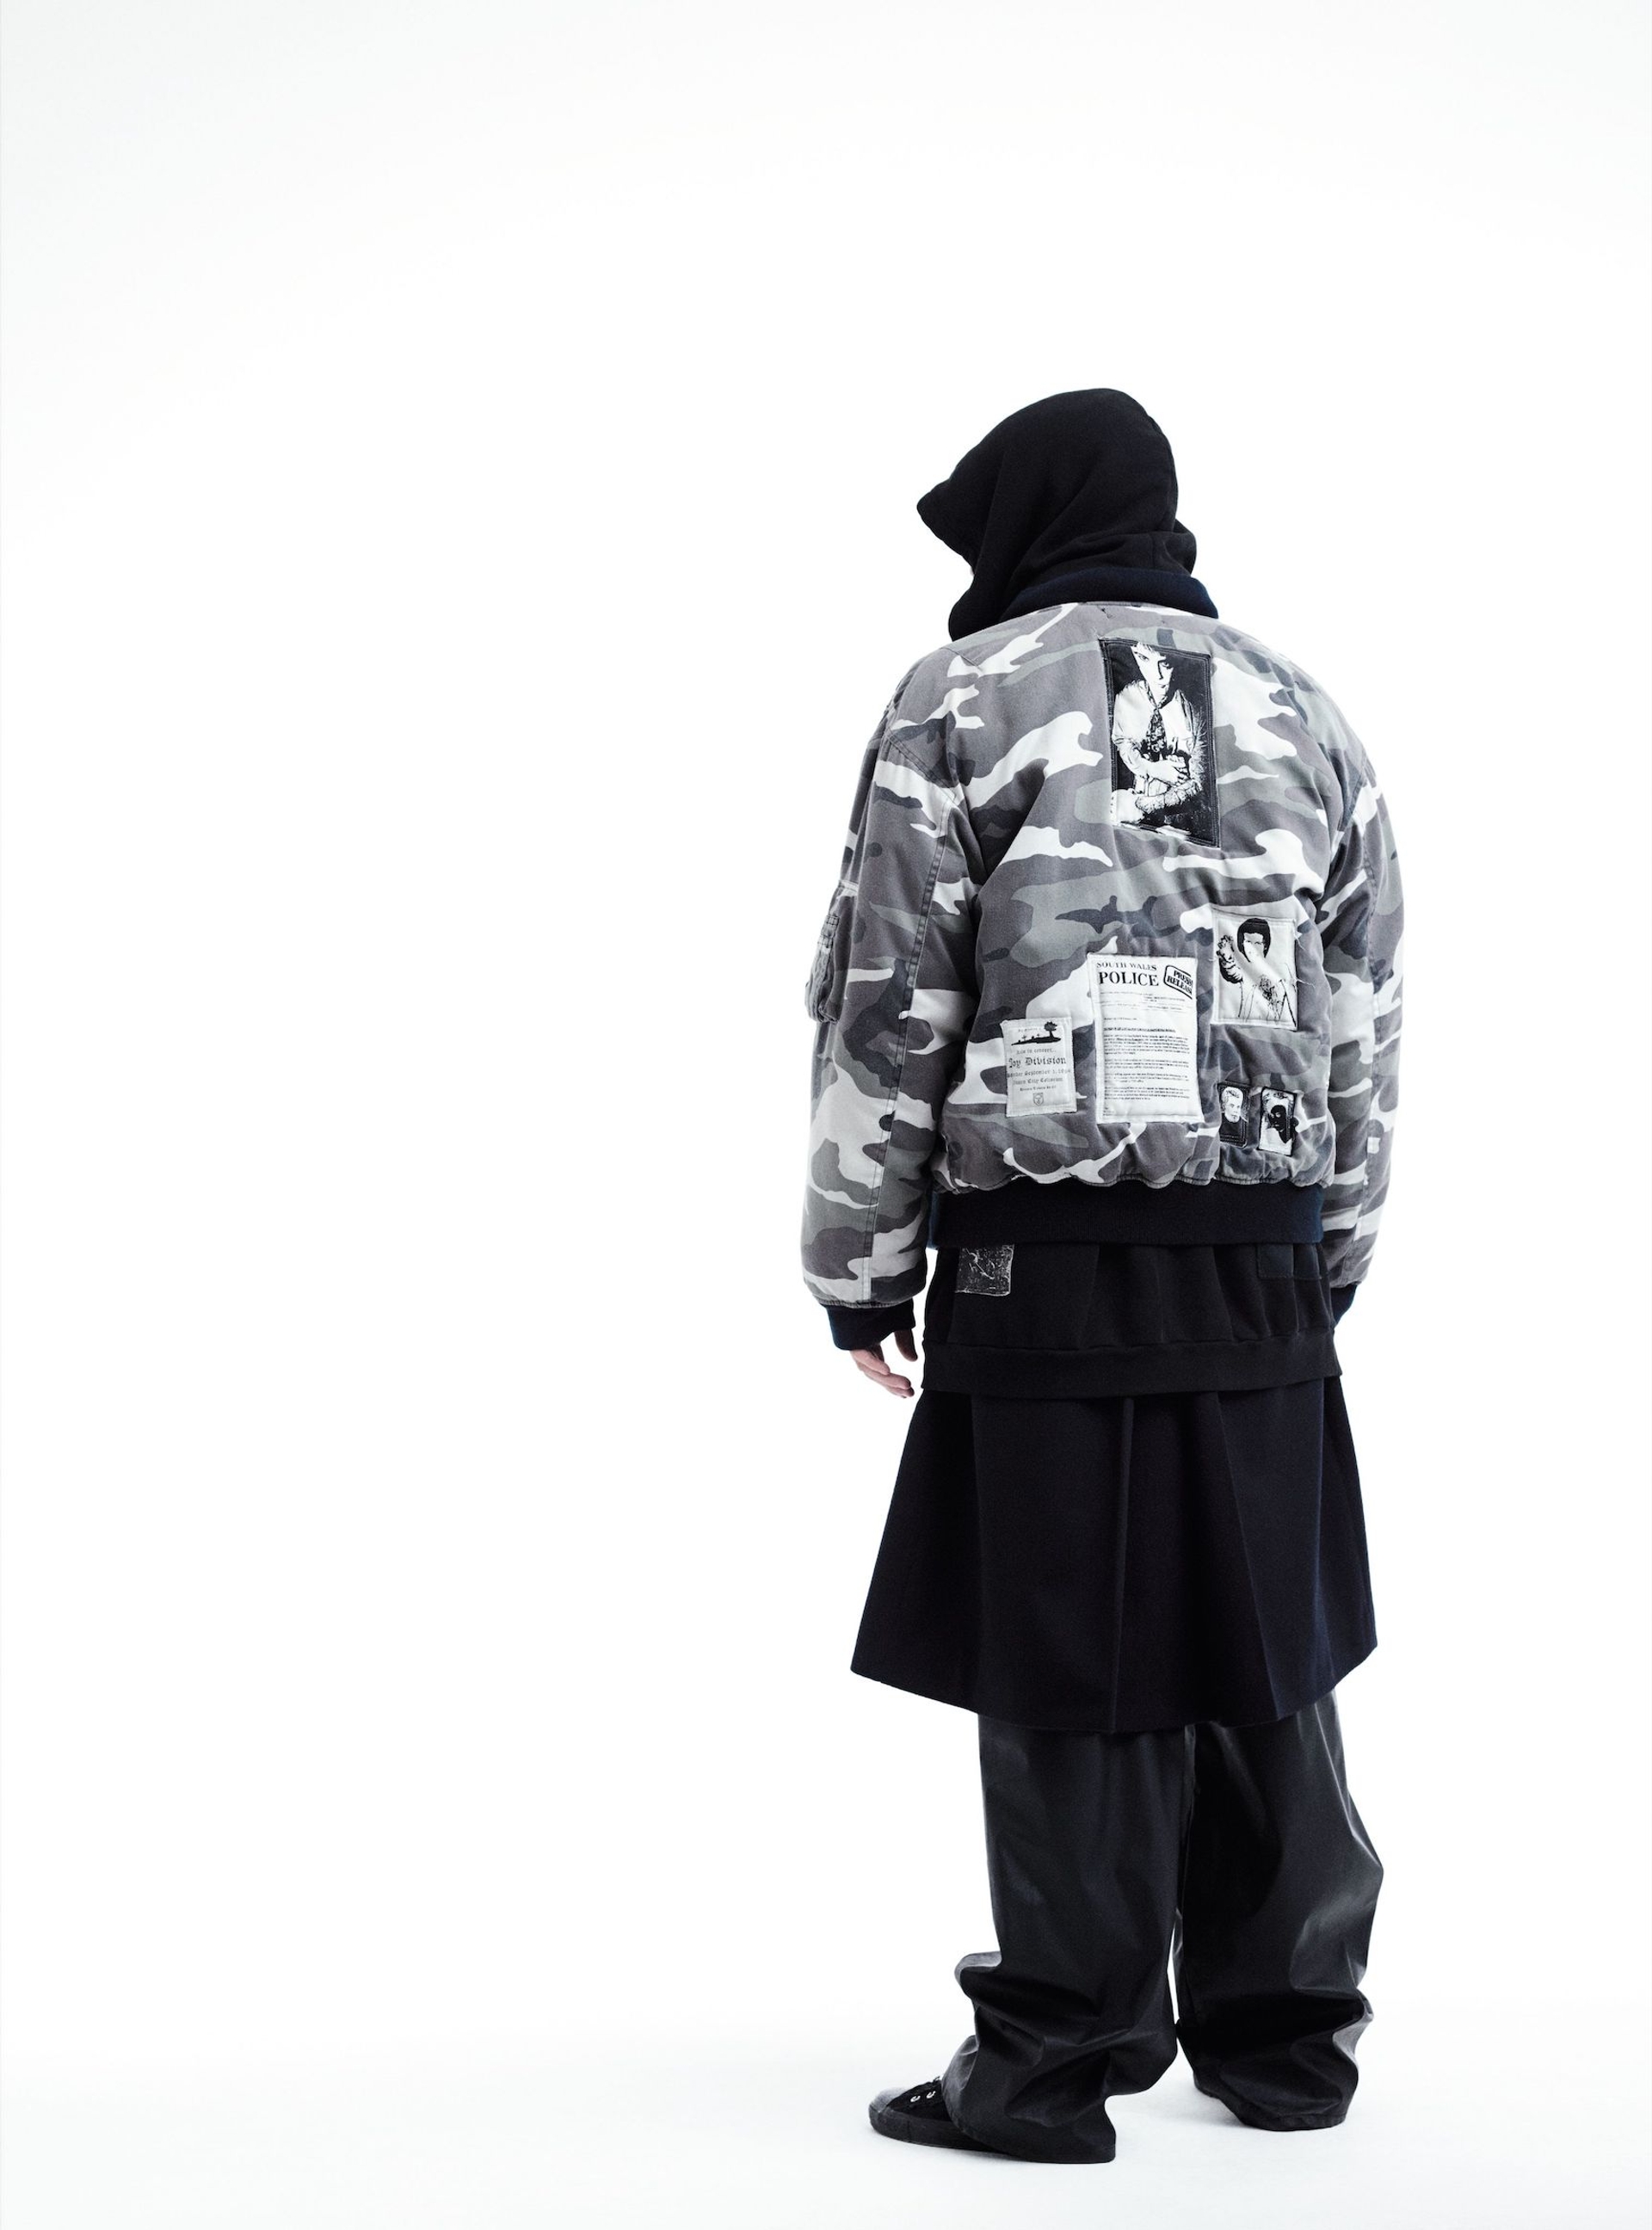 LUCA: cotton distressed camouflage patched bomber jacket, cotton distressed hooded patched sweat shirt, wool trench coat, rubberized jogging pants, customized 'All Stars': RAF SIMONS A/W 2001/2002